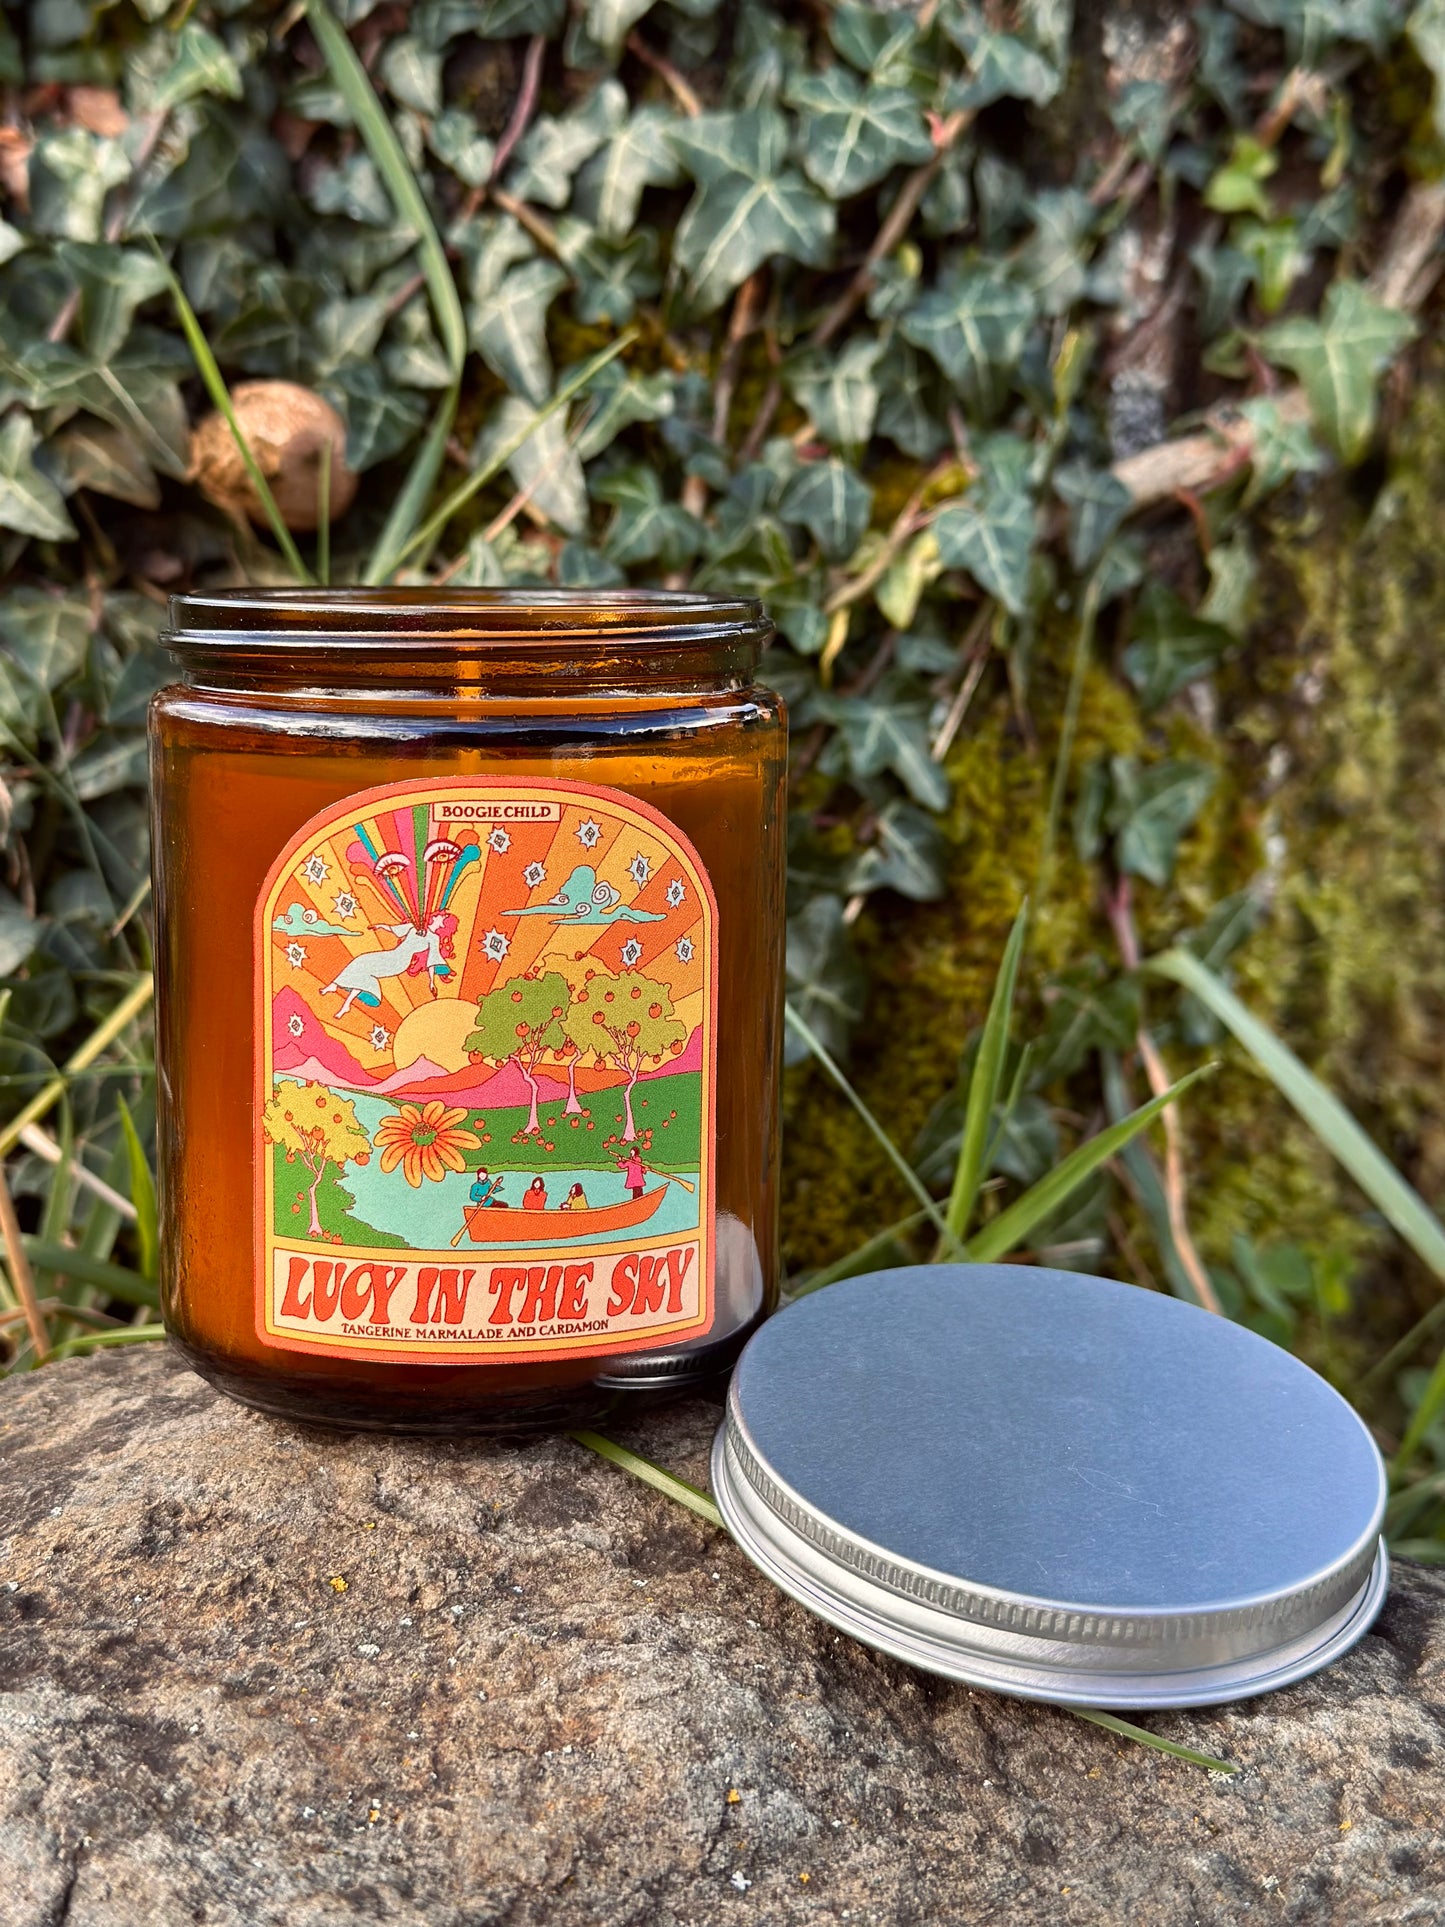 Lucy In The Sky Candle - Tangerine Marmalade and Cardamon